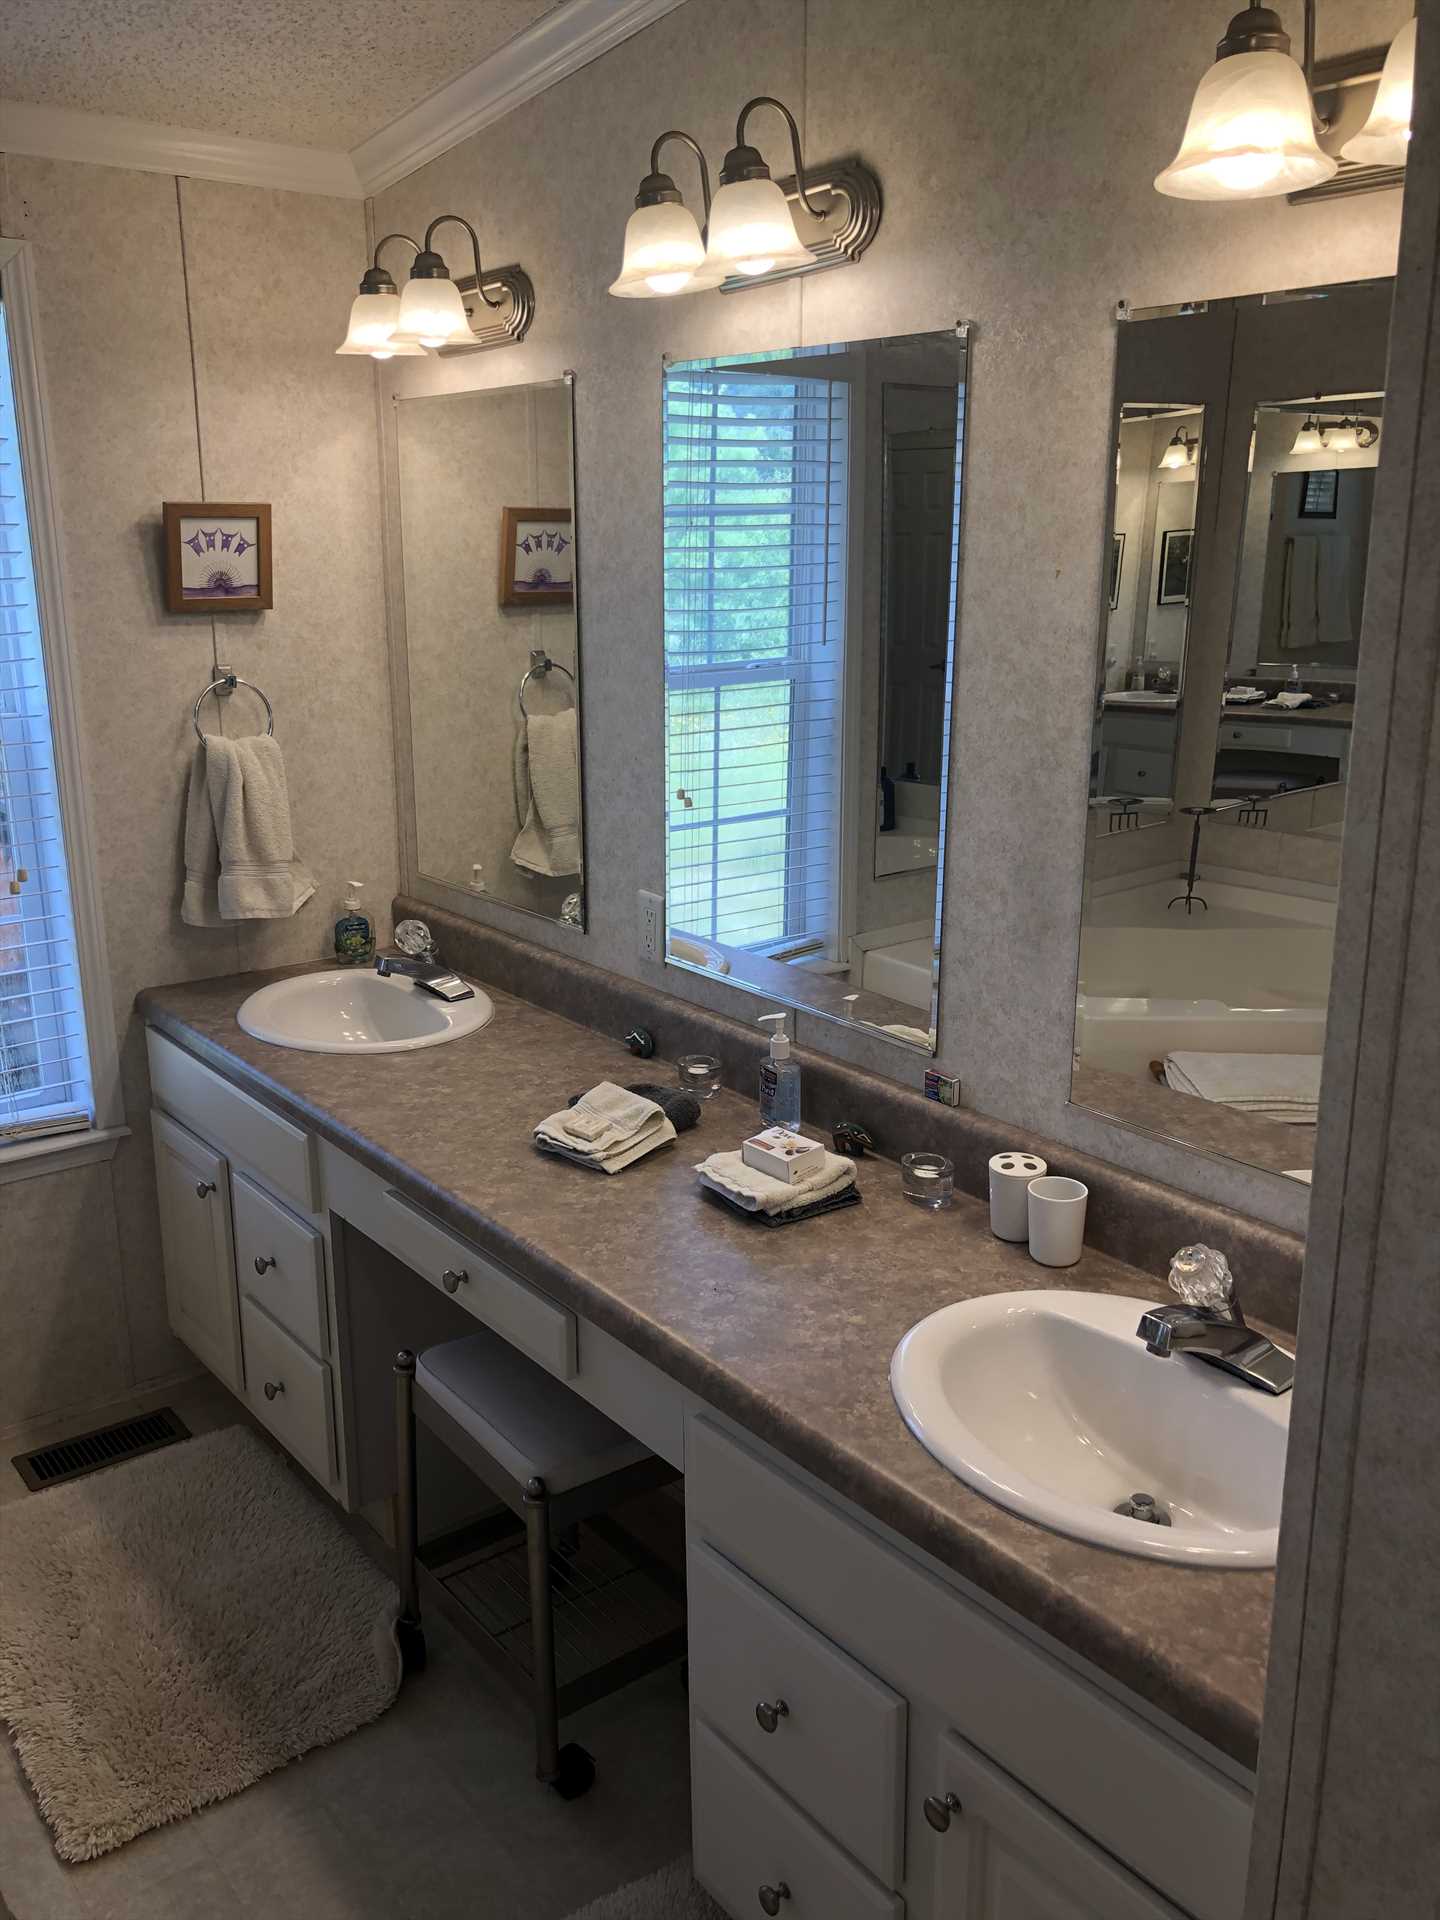                                                 Twin mirrored vanities, tons of counter space, and a generous supply of clean bath linens round out what you'll find in the master bath.